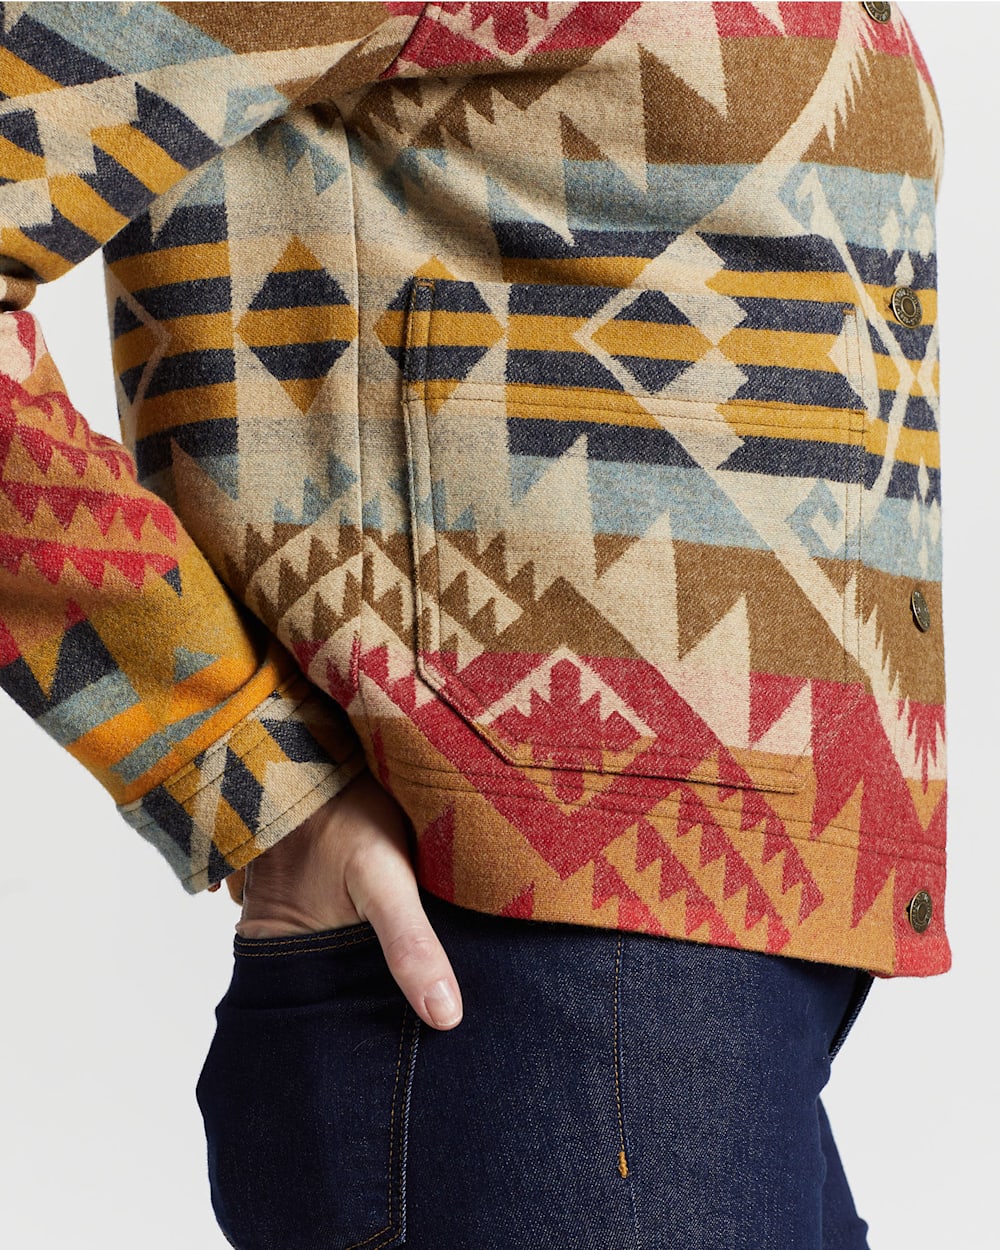 ALTERNATE VIEW OF WOMEN'S LIMITED EDITION CARDWELL WOOL JACKET IN JOURNEY WEST MULTI image number 5